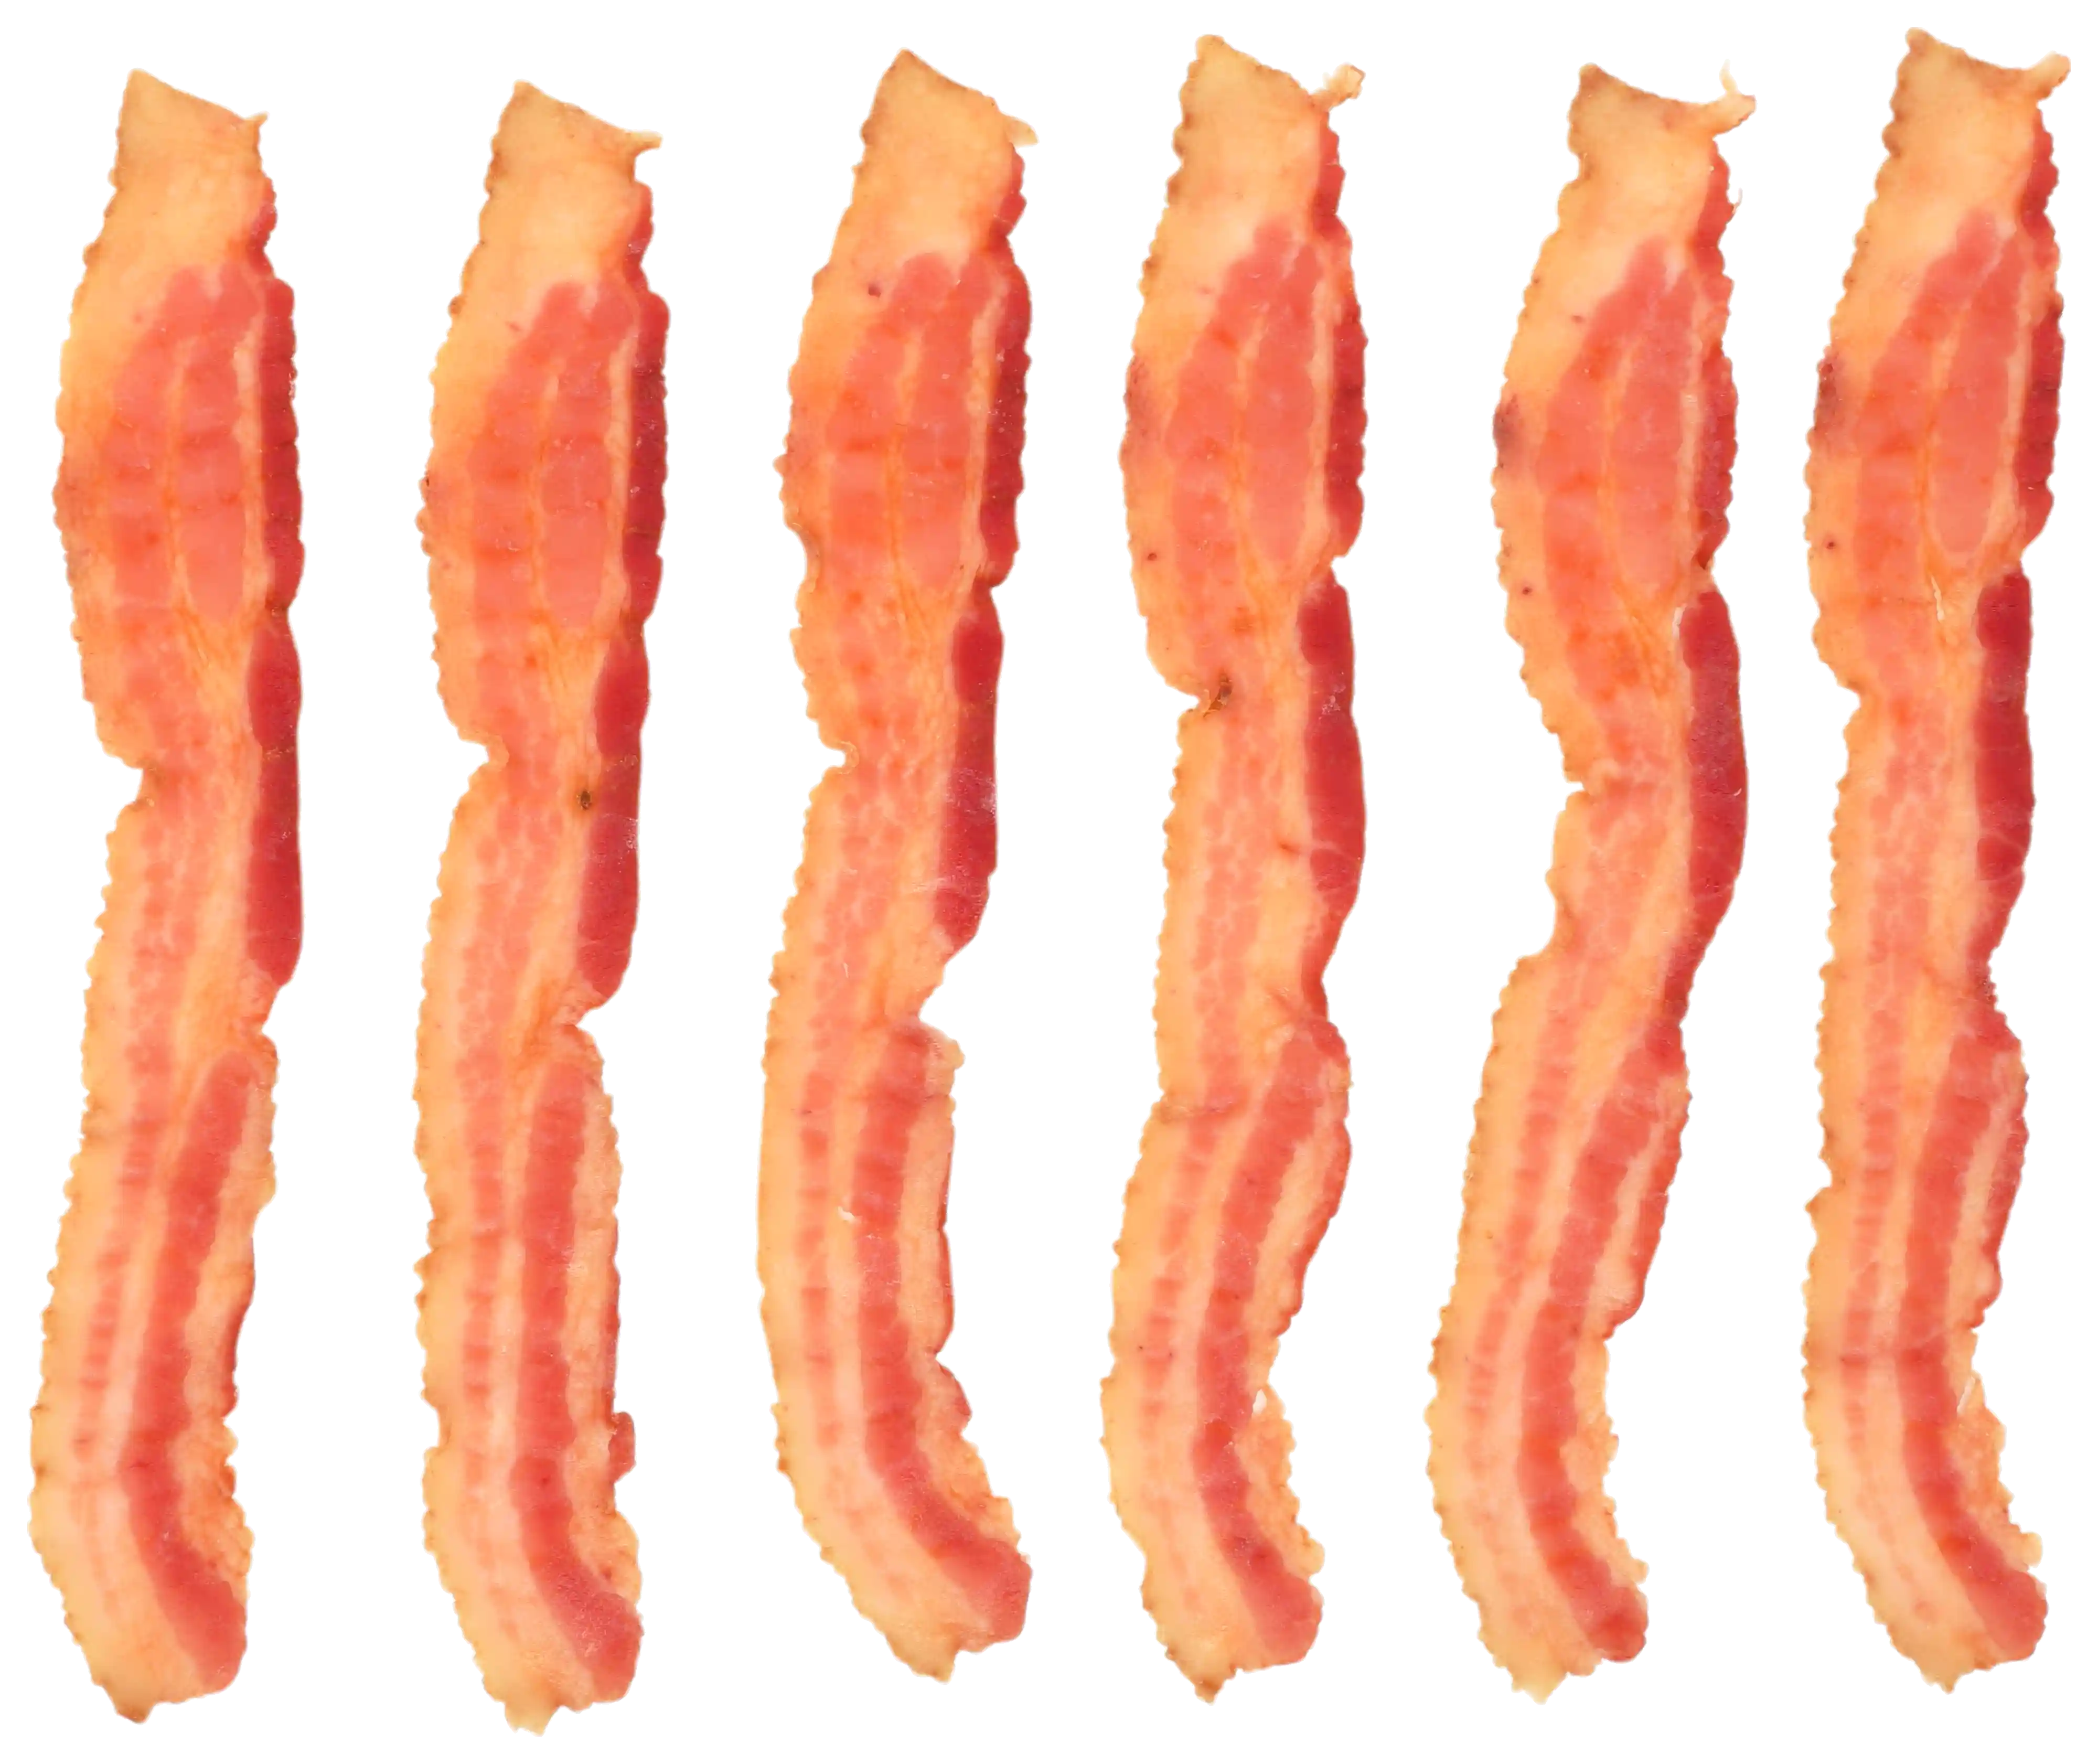 Jimmy Dean® Fully Cooked Applewood Smoked Thin Bacon Slices_image_21